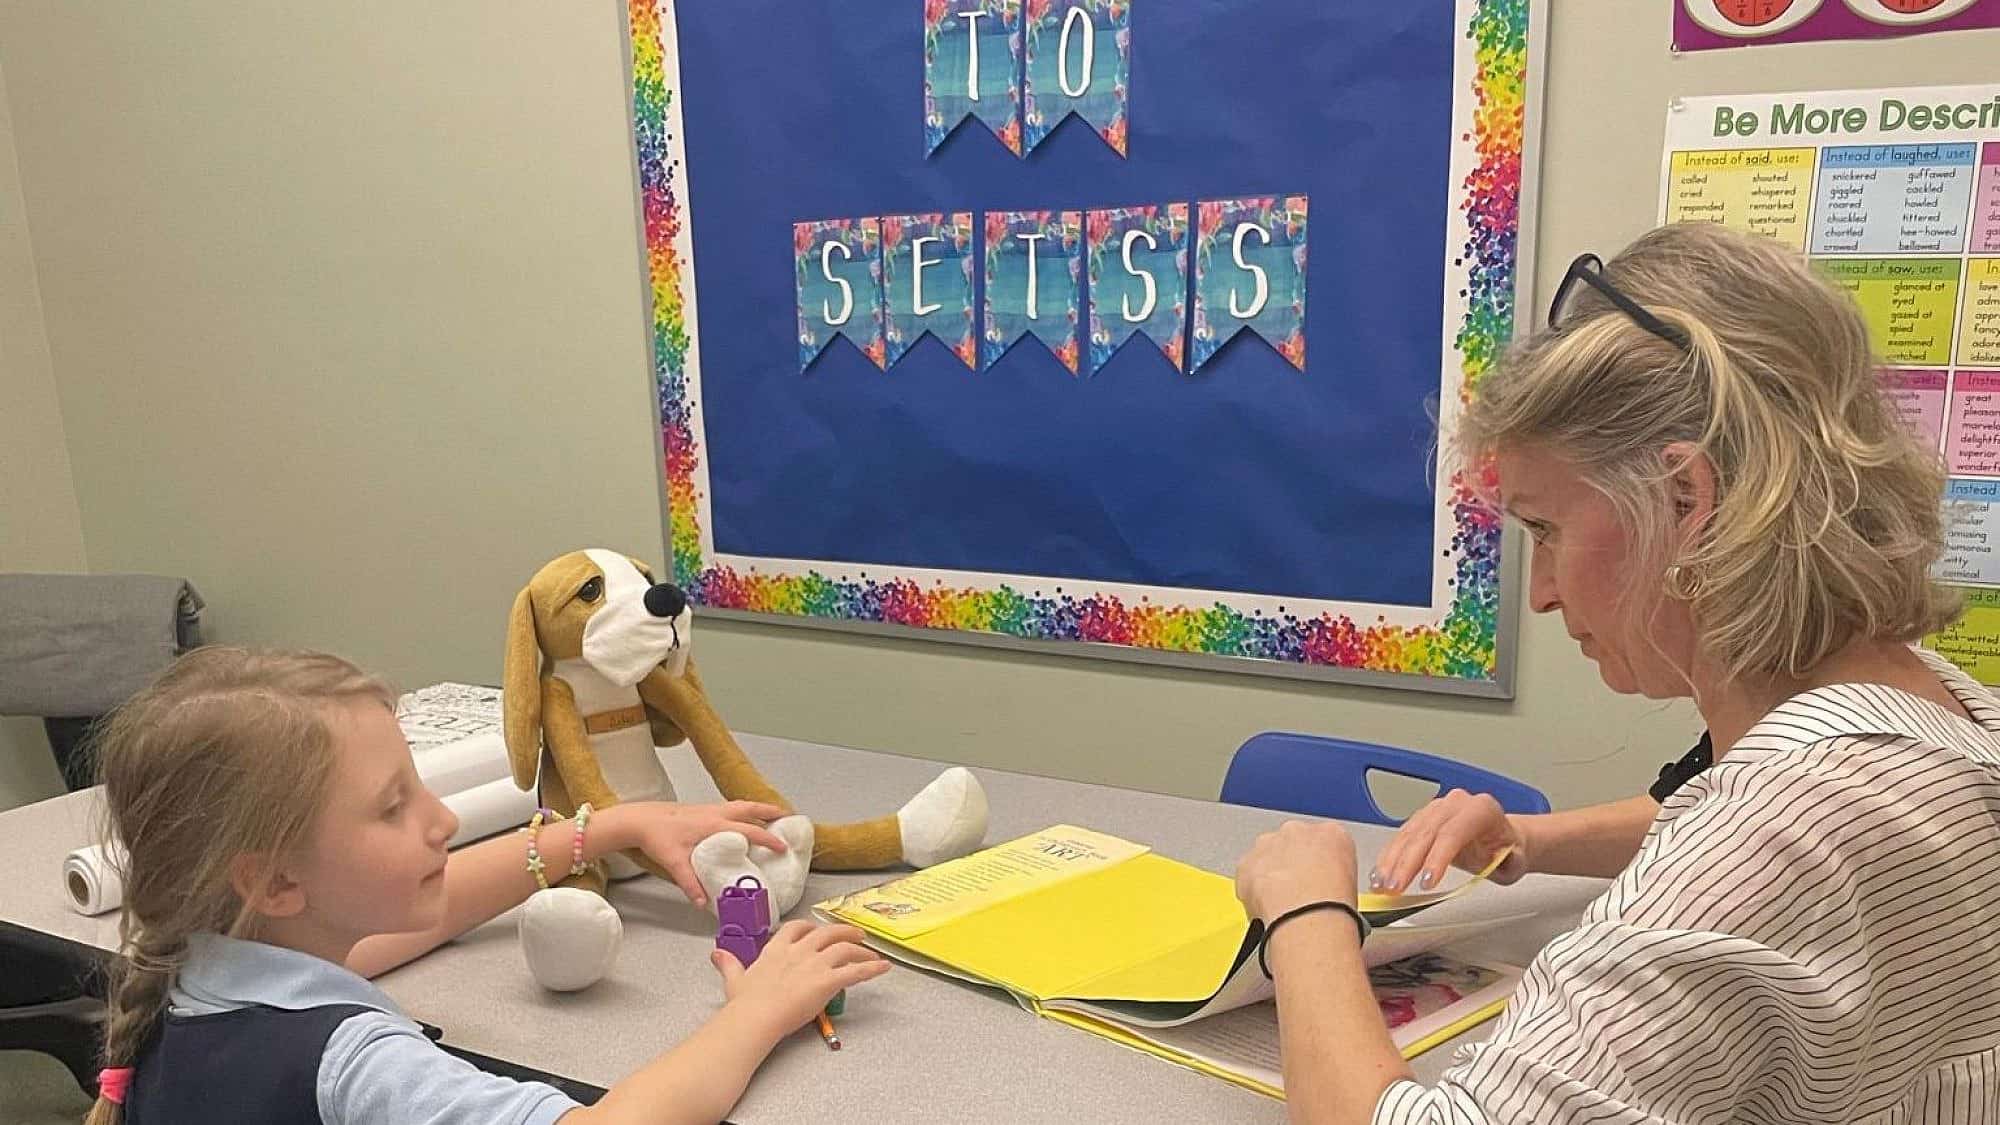 Inna Muntyan, an educational interventionist at Hebrew Language Academy in Brooklyn, N.Y., works with Polina, a refugee from Ukraine, with a Hibuki therapy doll. Credit: Courtesy.